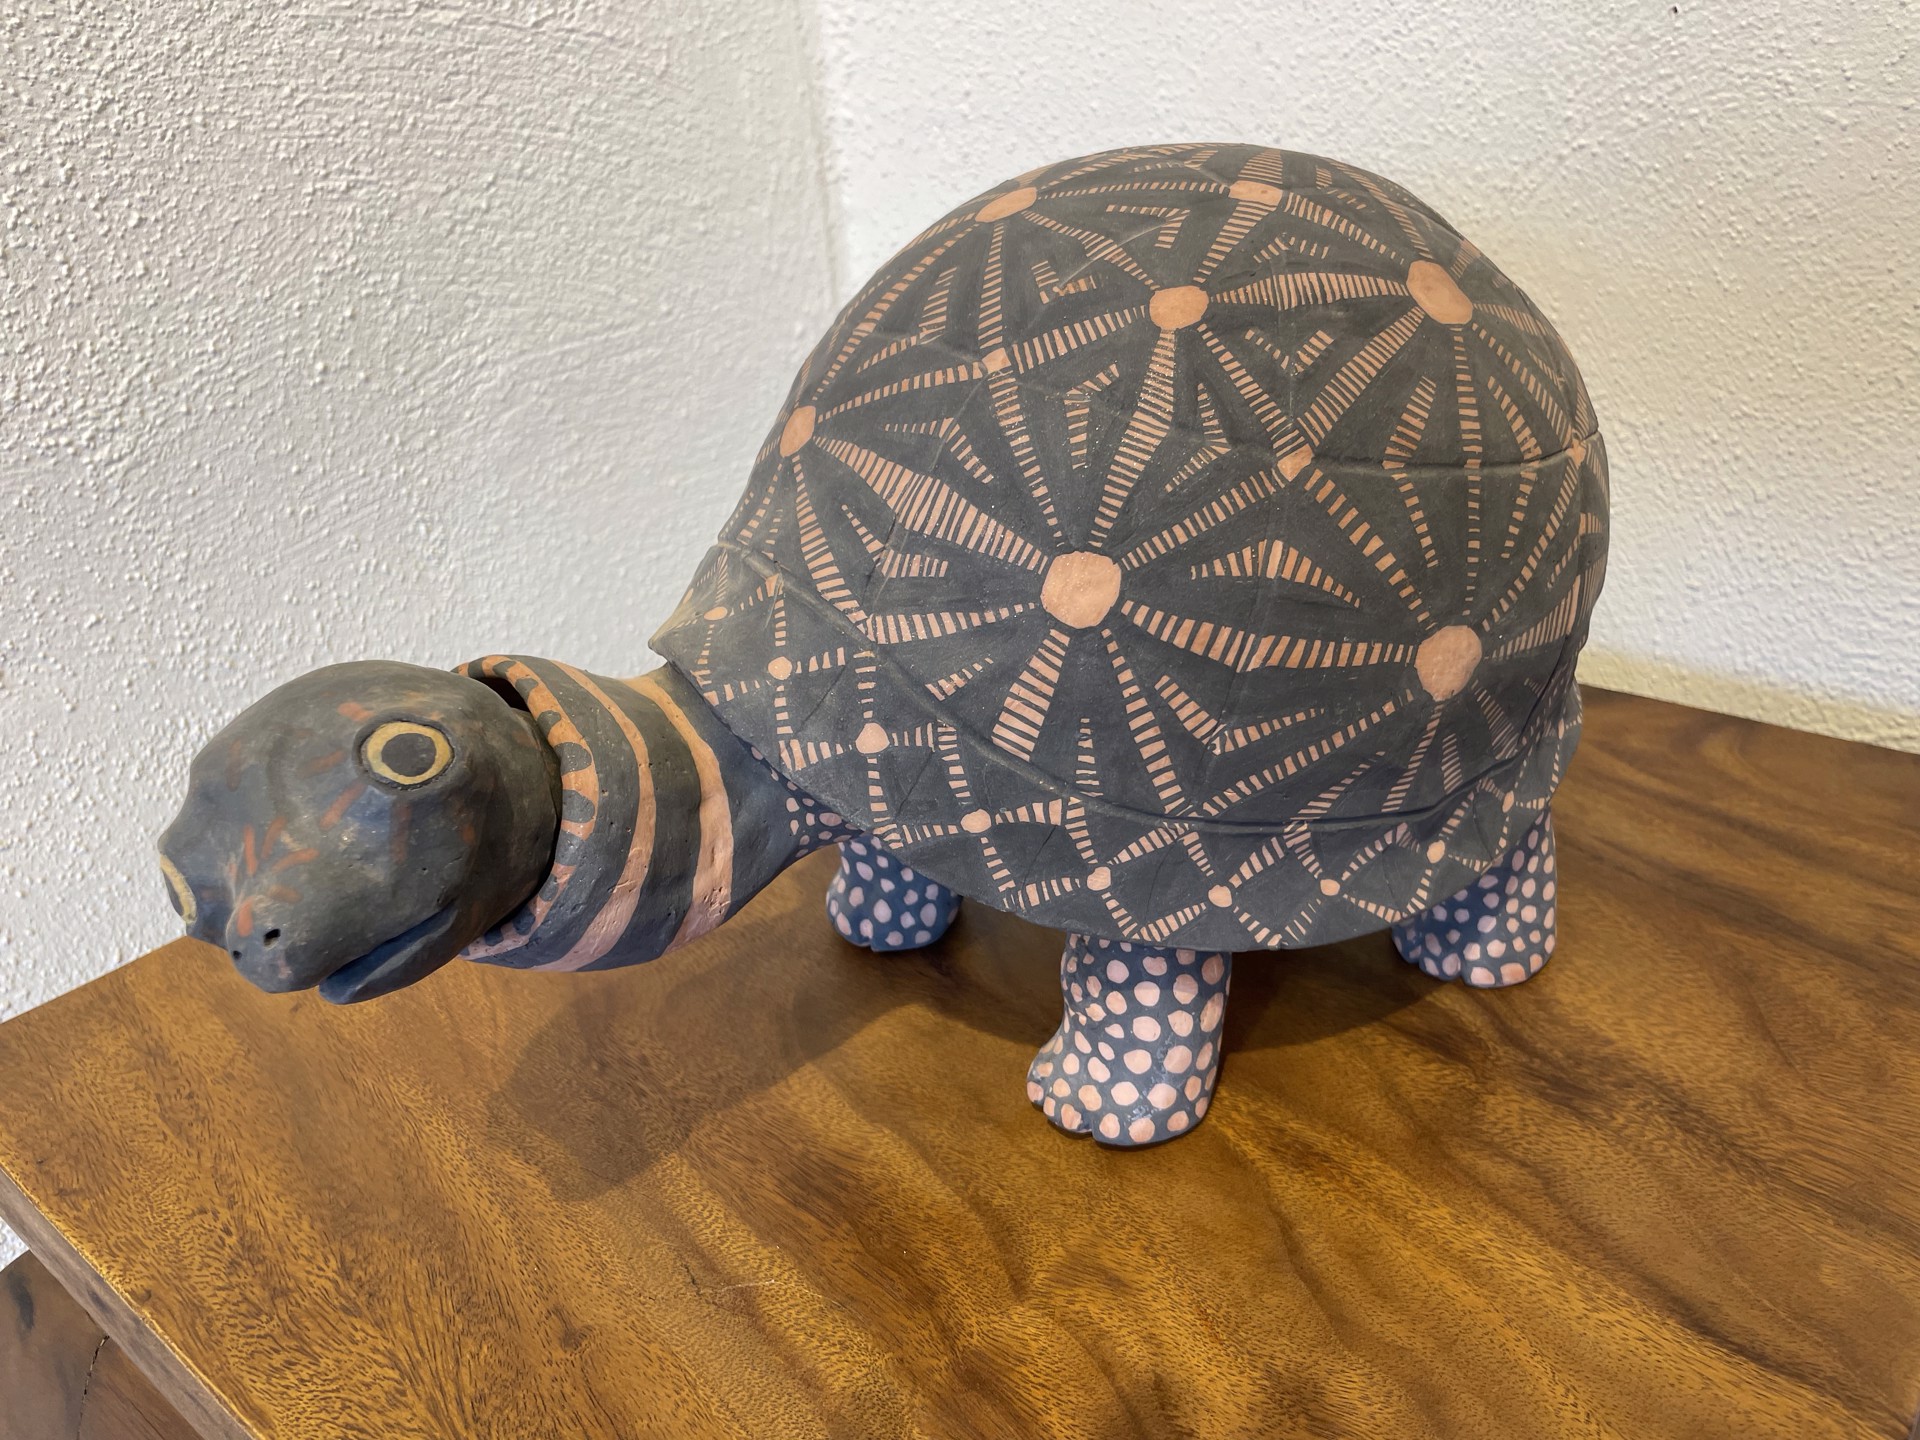 1721 Turtle by Molly Heizer